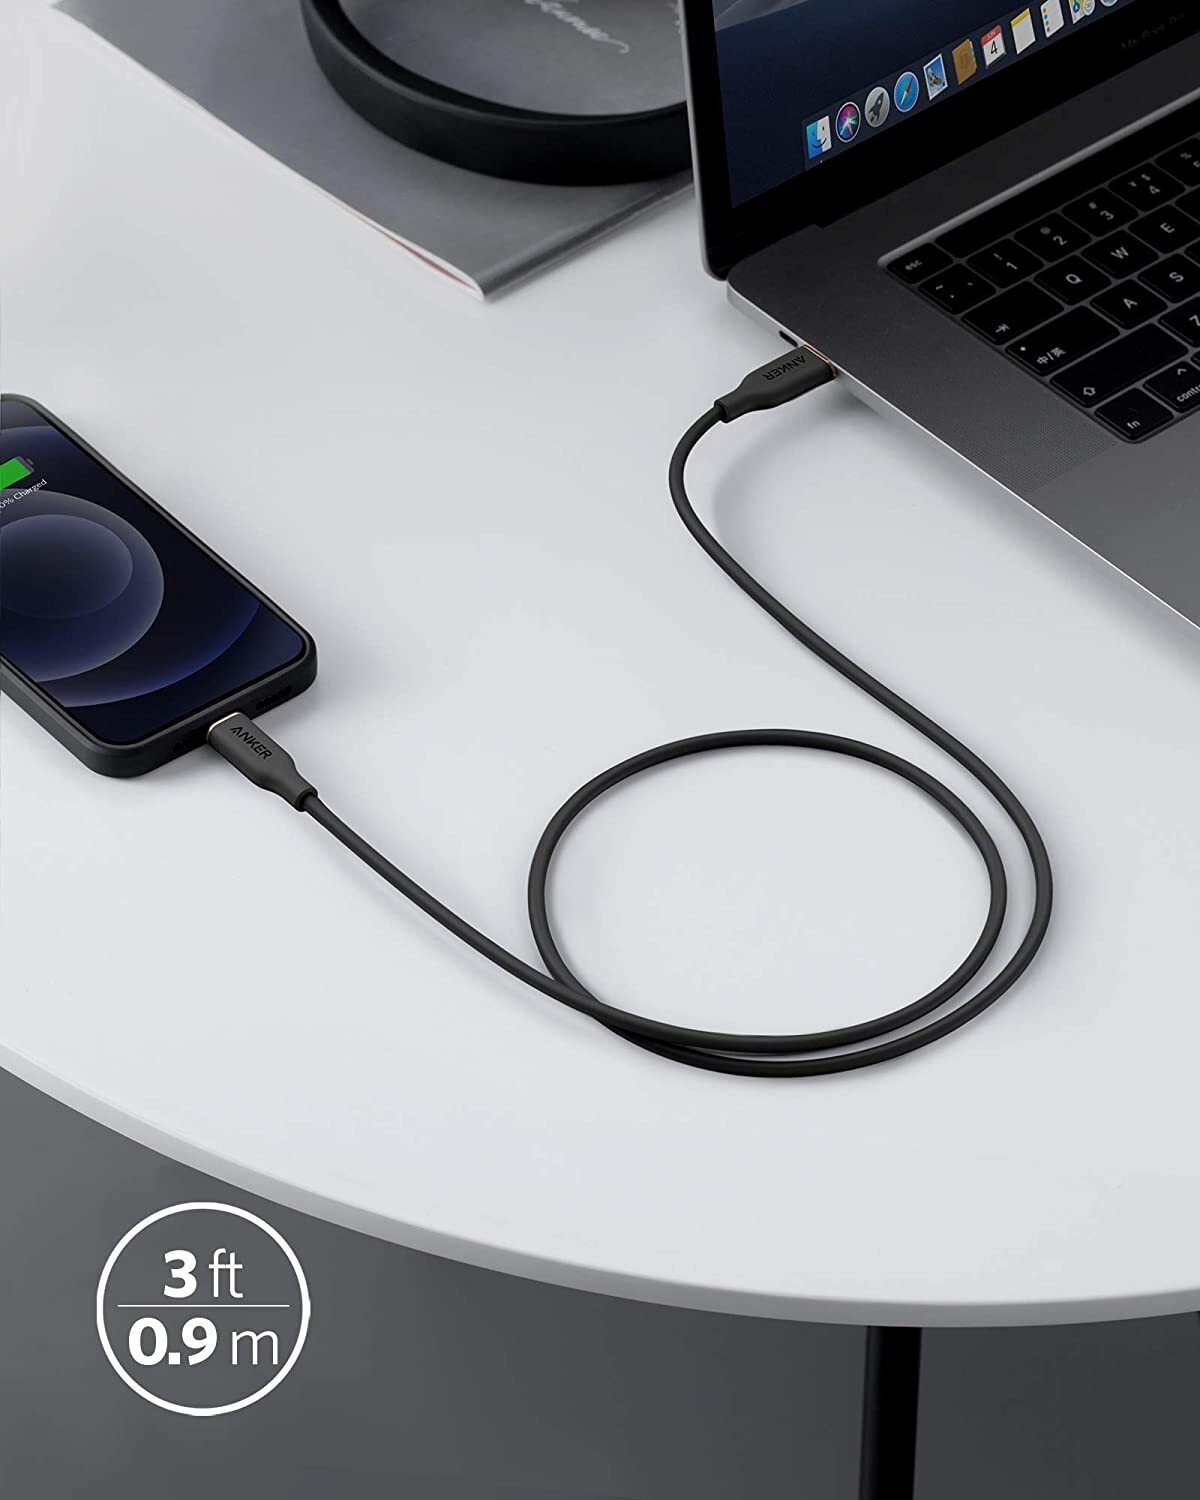 Anker 643 USB-C to USB-C Cable (Flow, Silicone) - Anker US